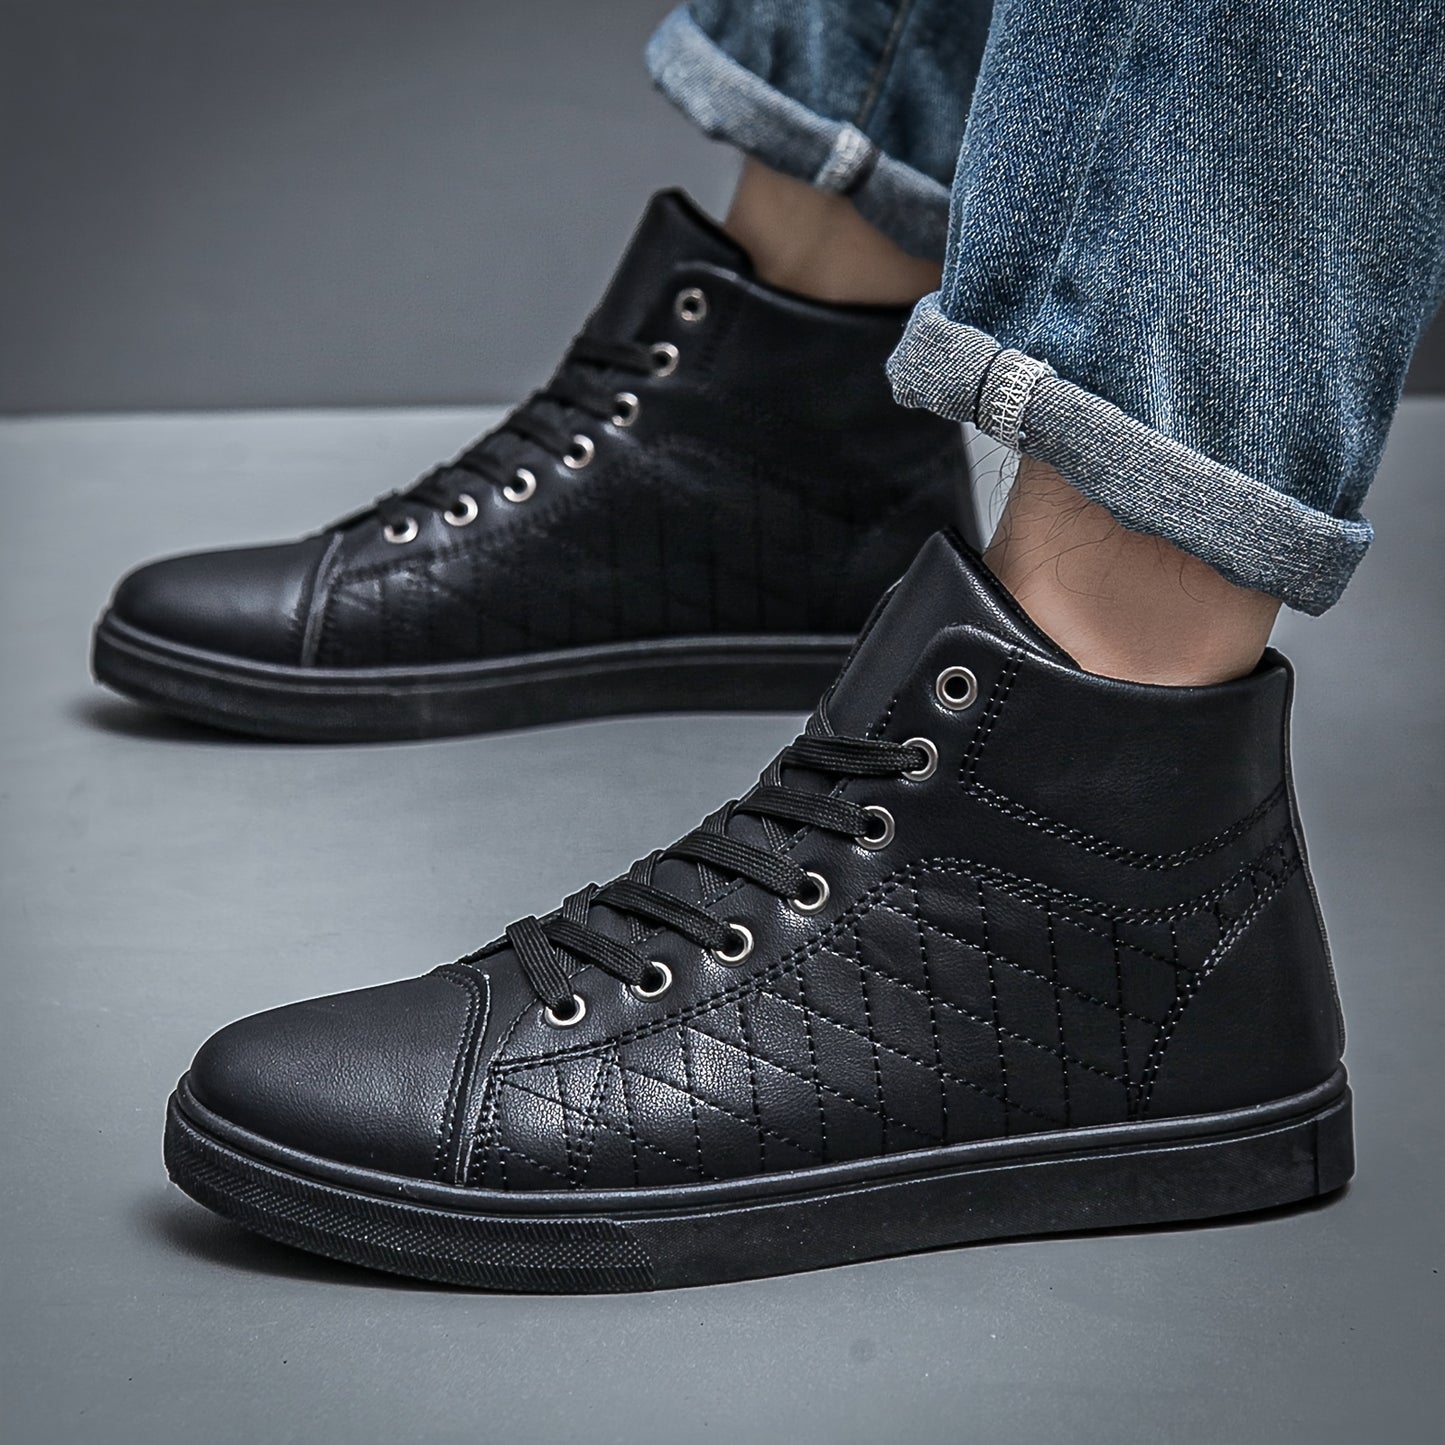 Men's Solid Ankle Boots - Comfy Non-Slip Soft Sole Sneakers